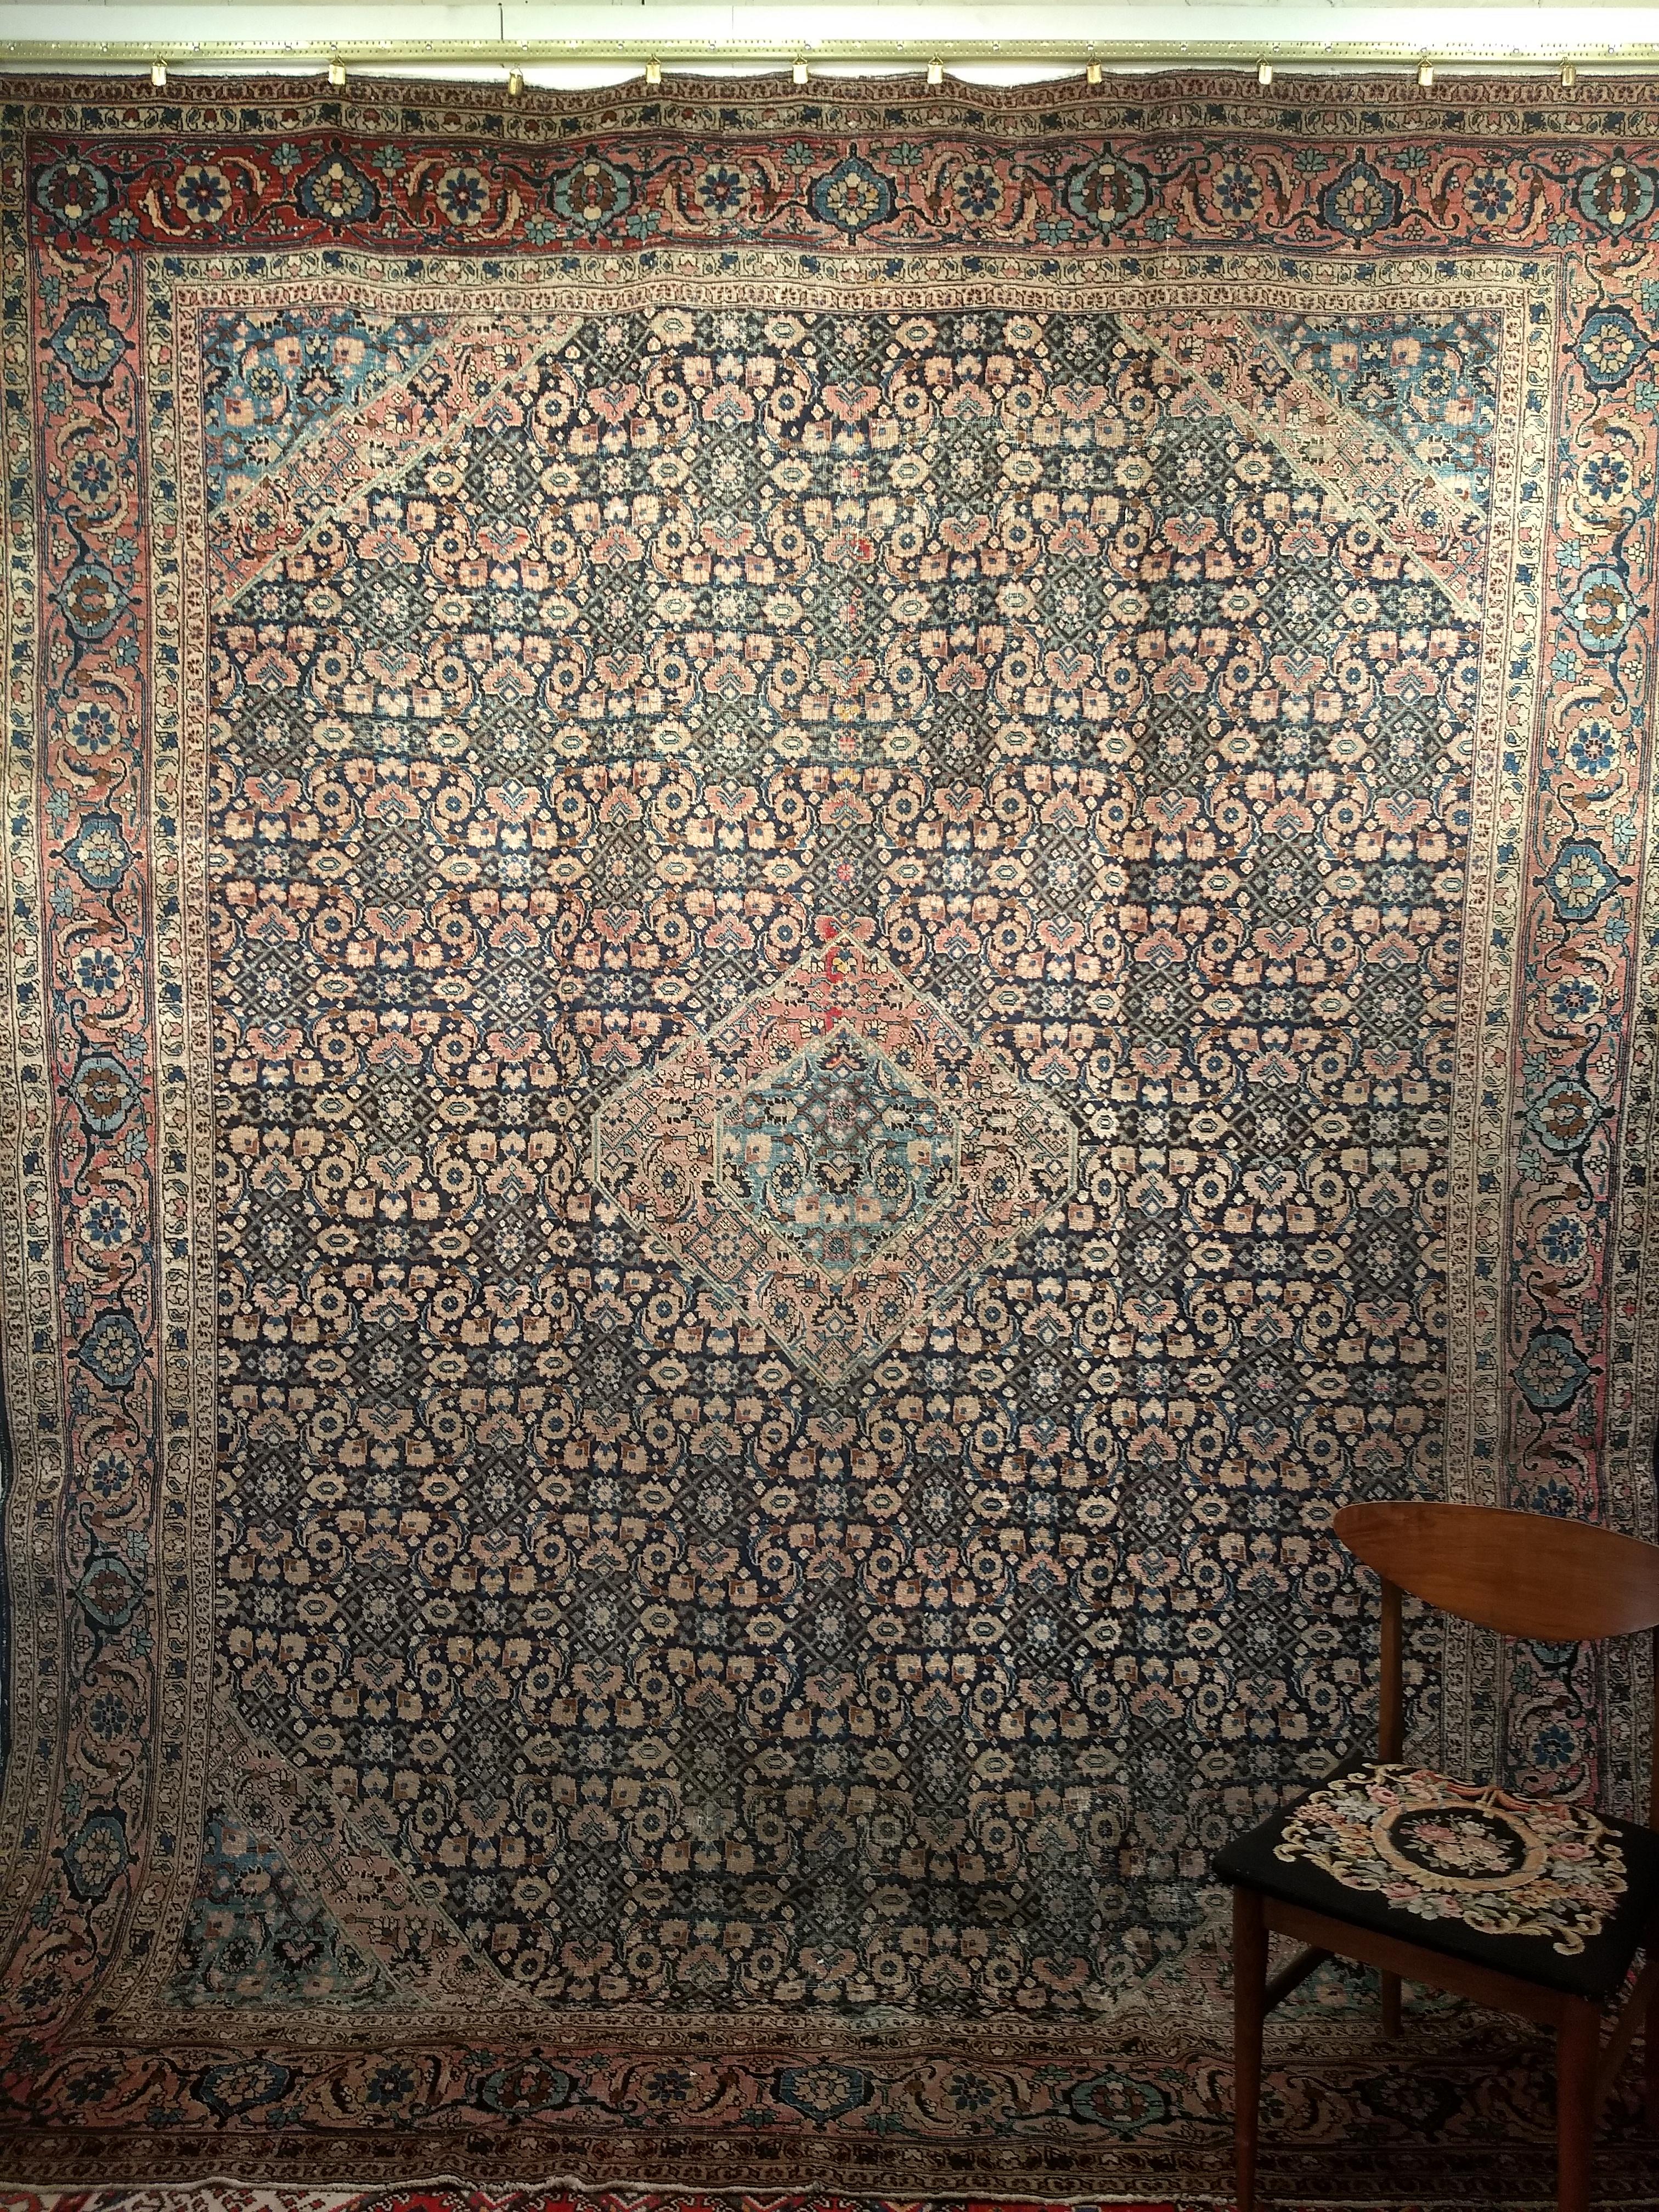 A beautiful Persian Tabriz  in an all-over Herati pattern from the late 1800s. The midnight blue background has a small central medallion in pale red and baby blue.  The border is a beautiful abrash red color with tones of the rose’ with designs in